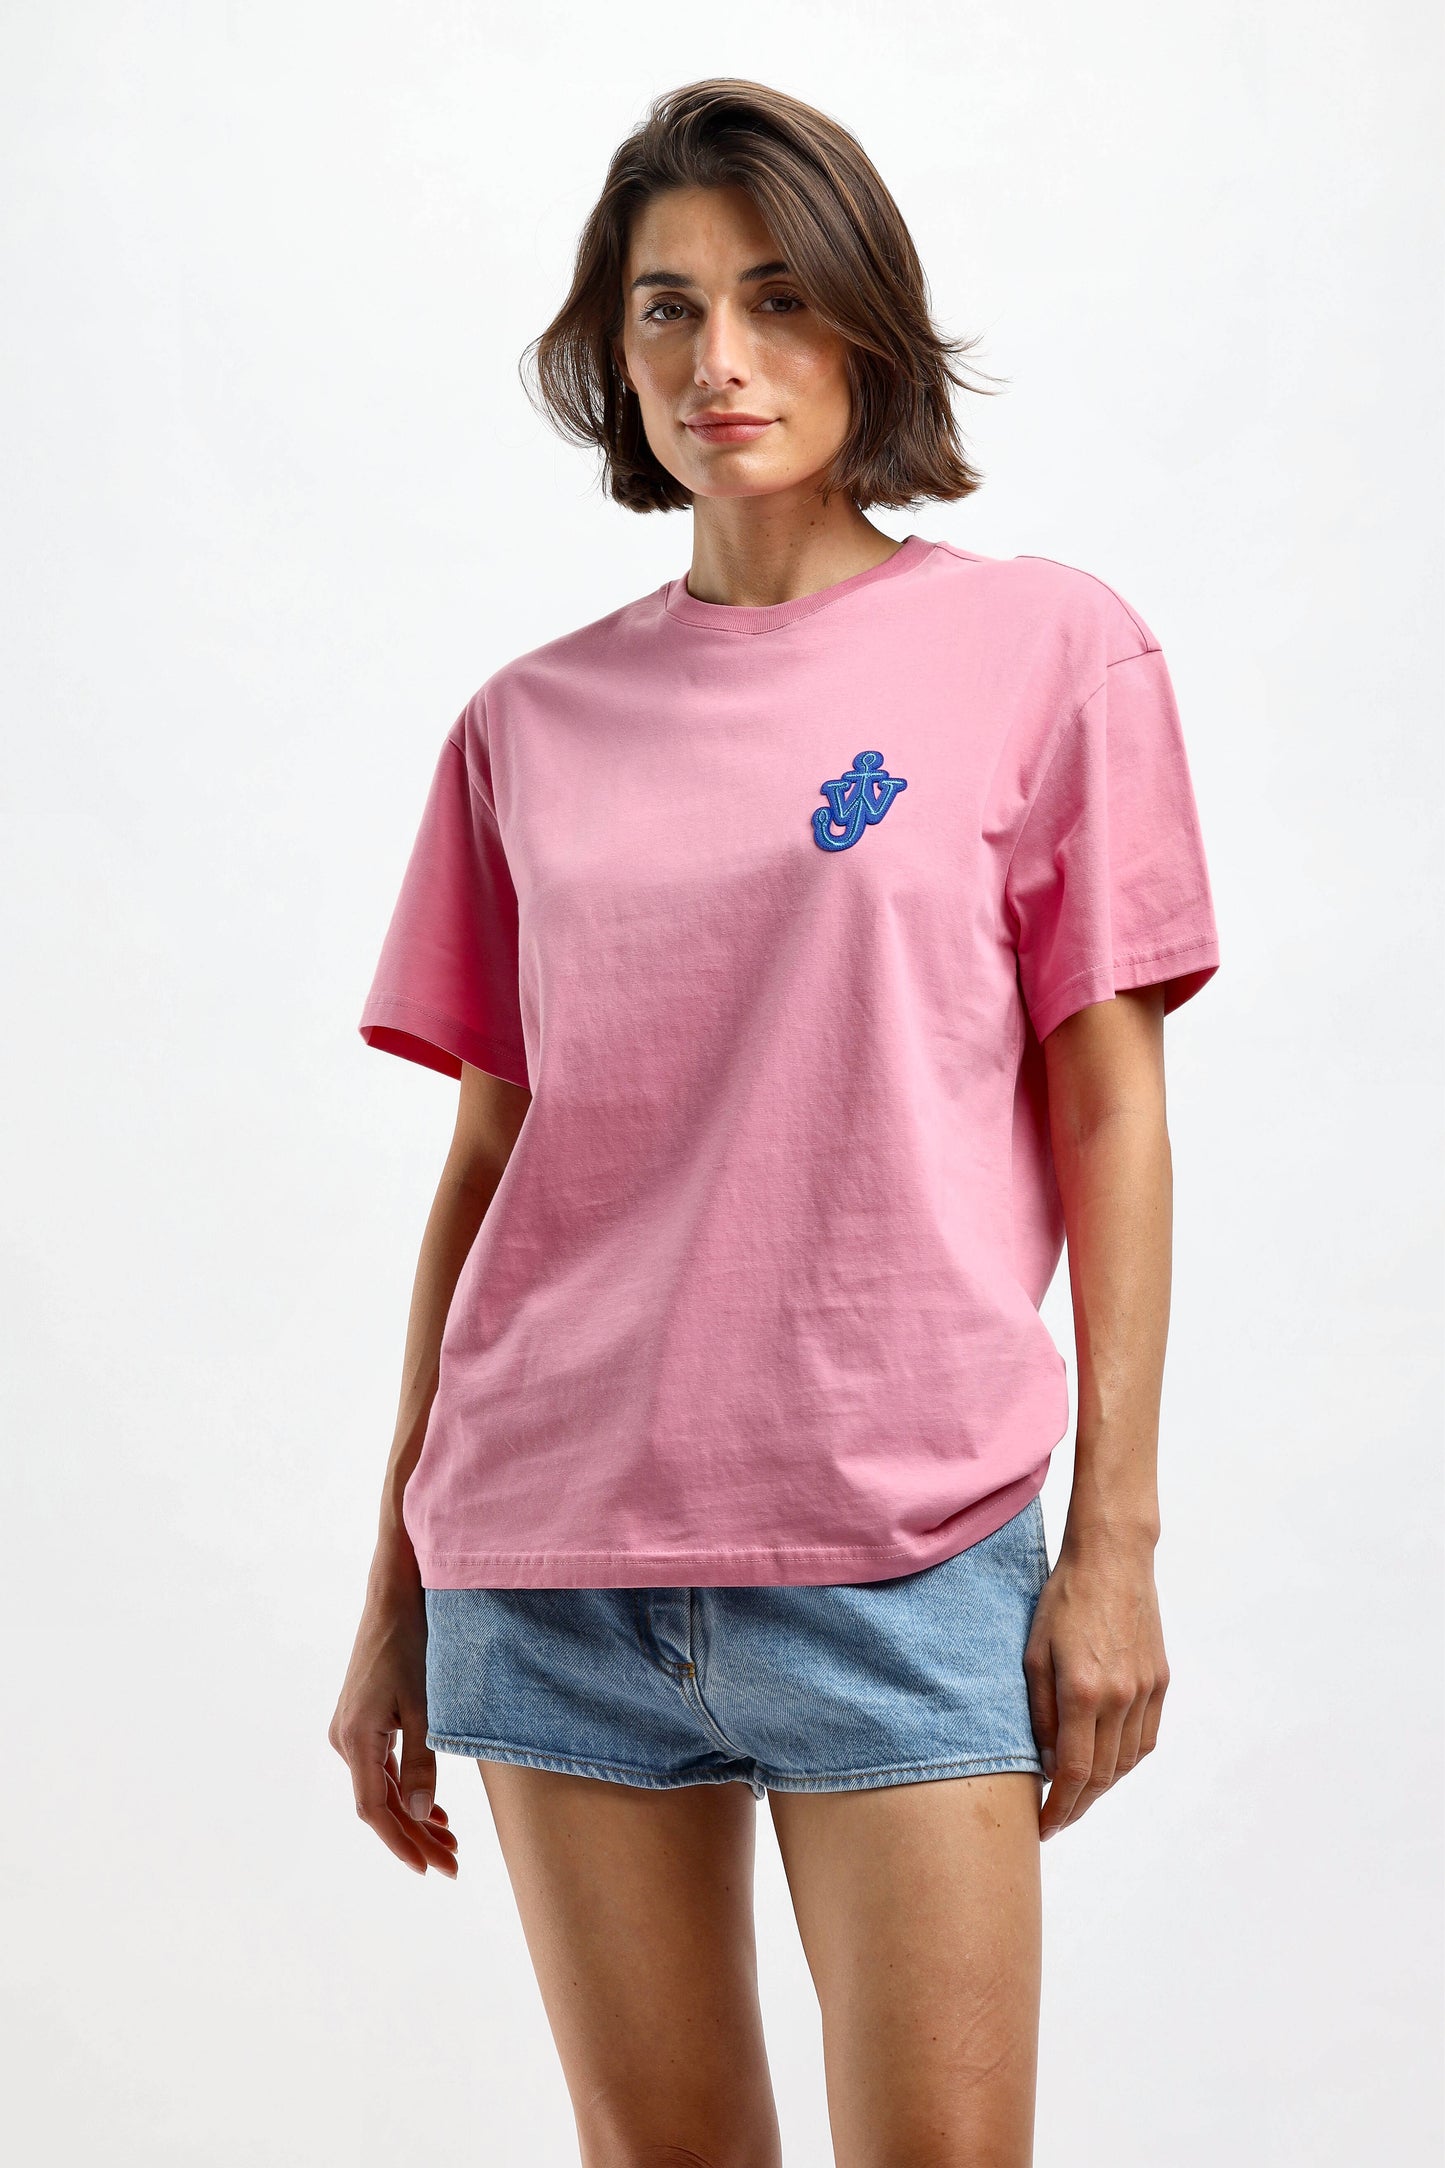 T-Shirt Anchor in PinkJW Anderson - Anita Hass